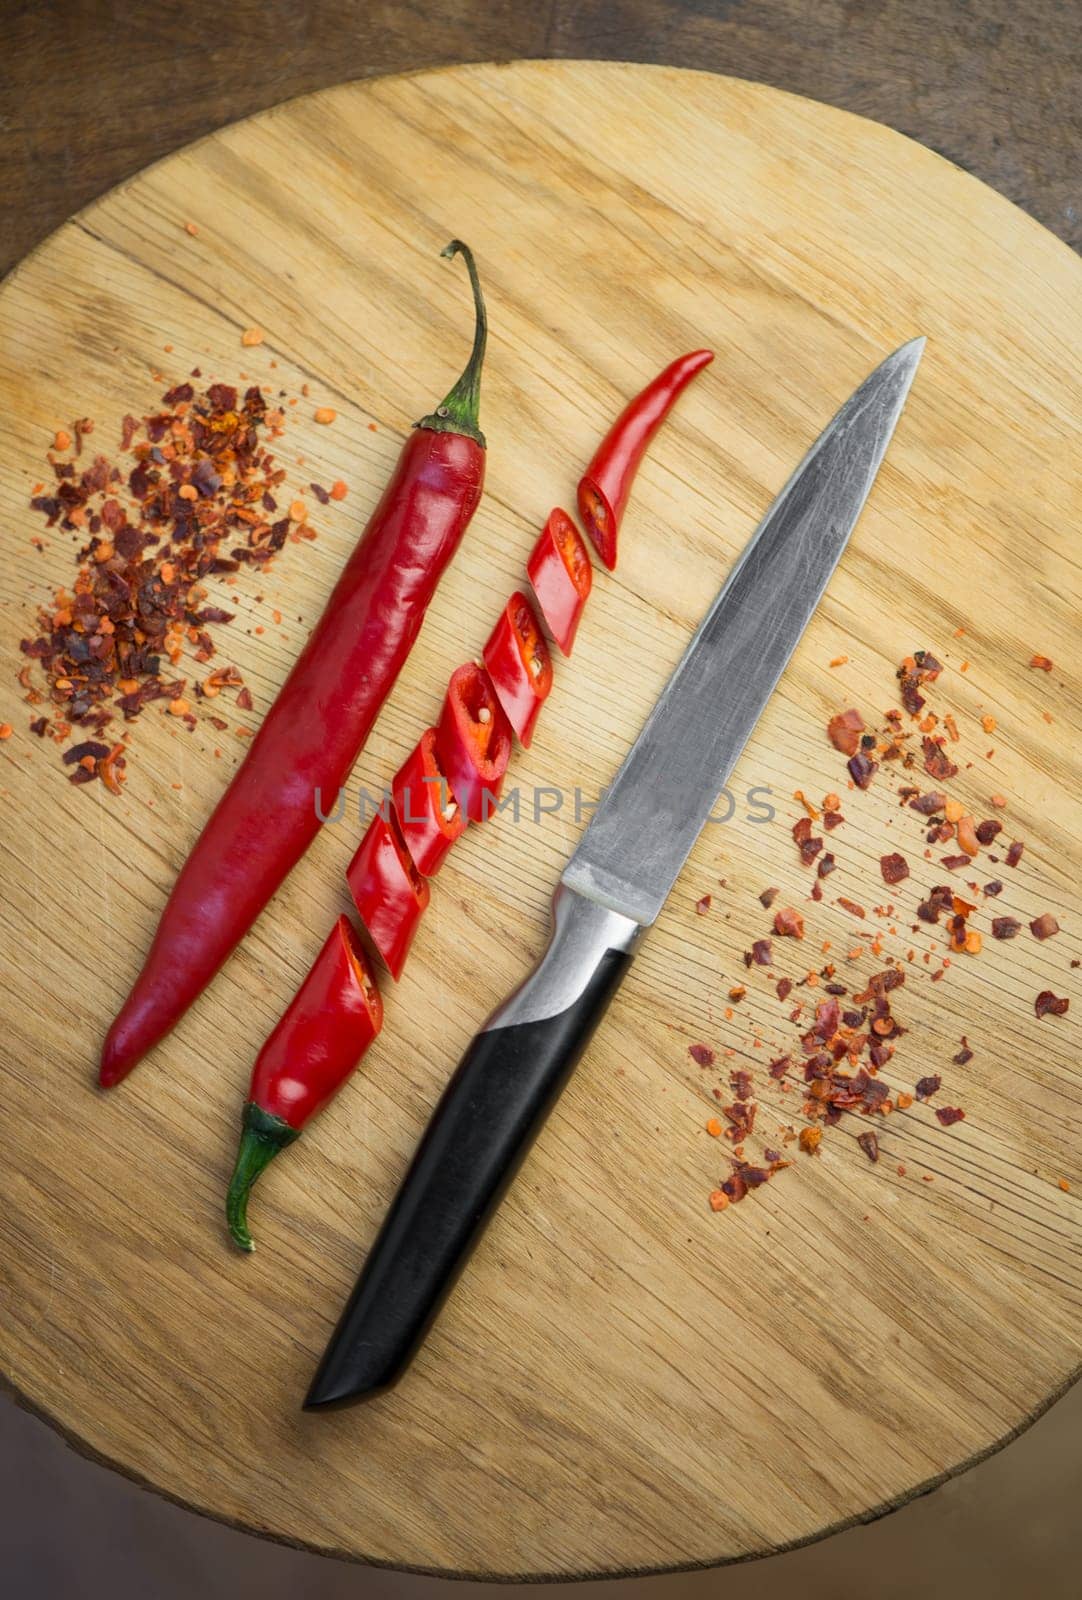 Red chili pepper cut into pieces on a black background. Hot spice, red chili and chili powder. by aprilphoto